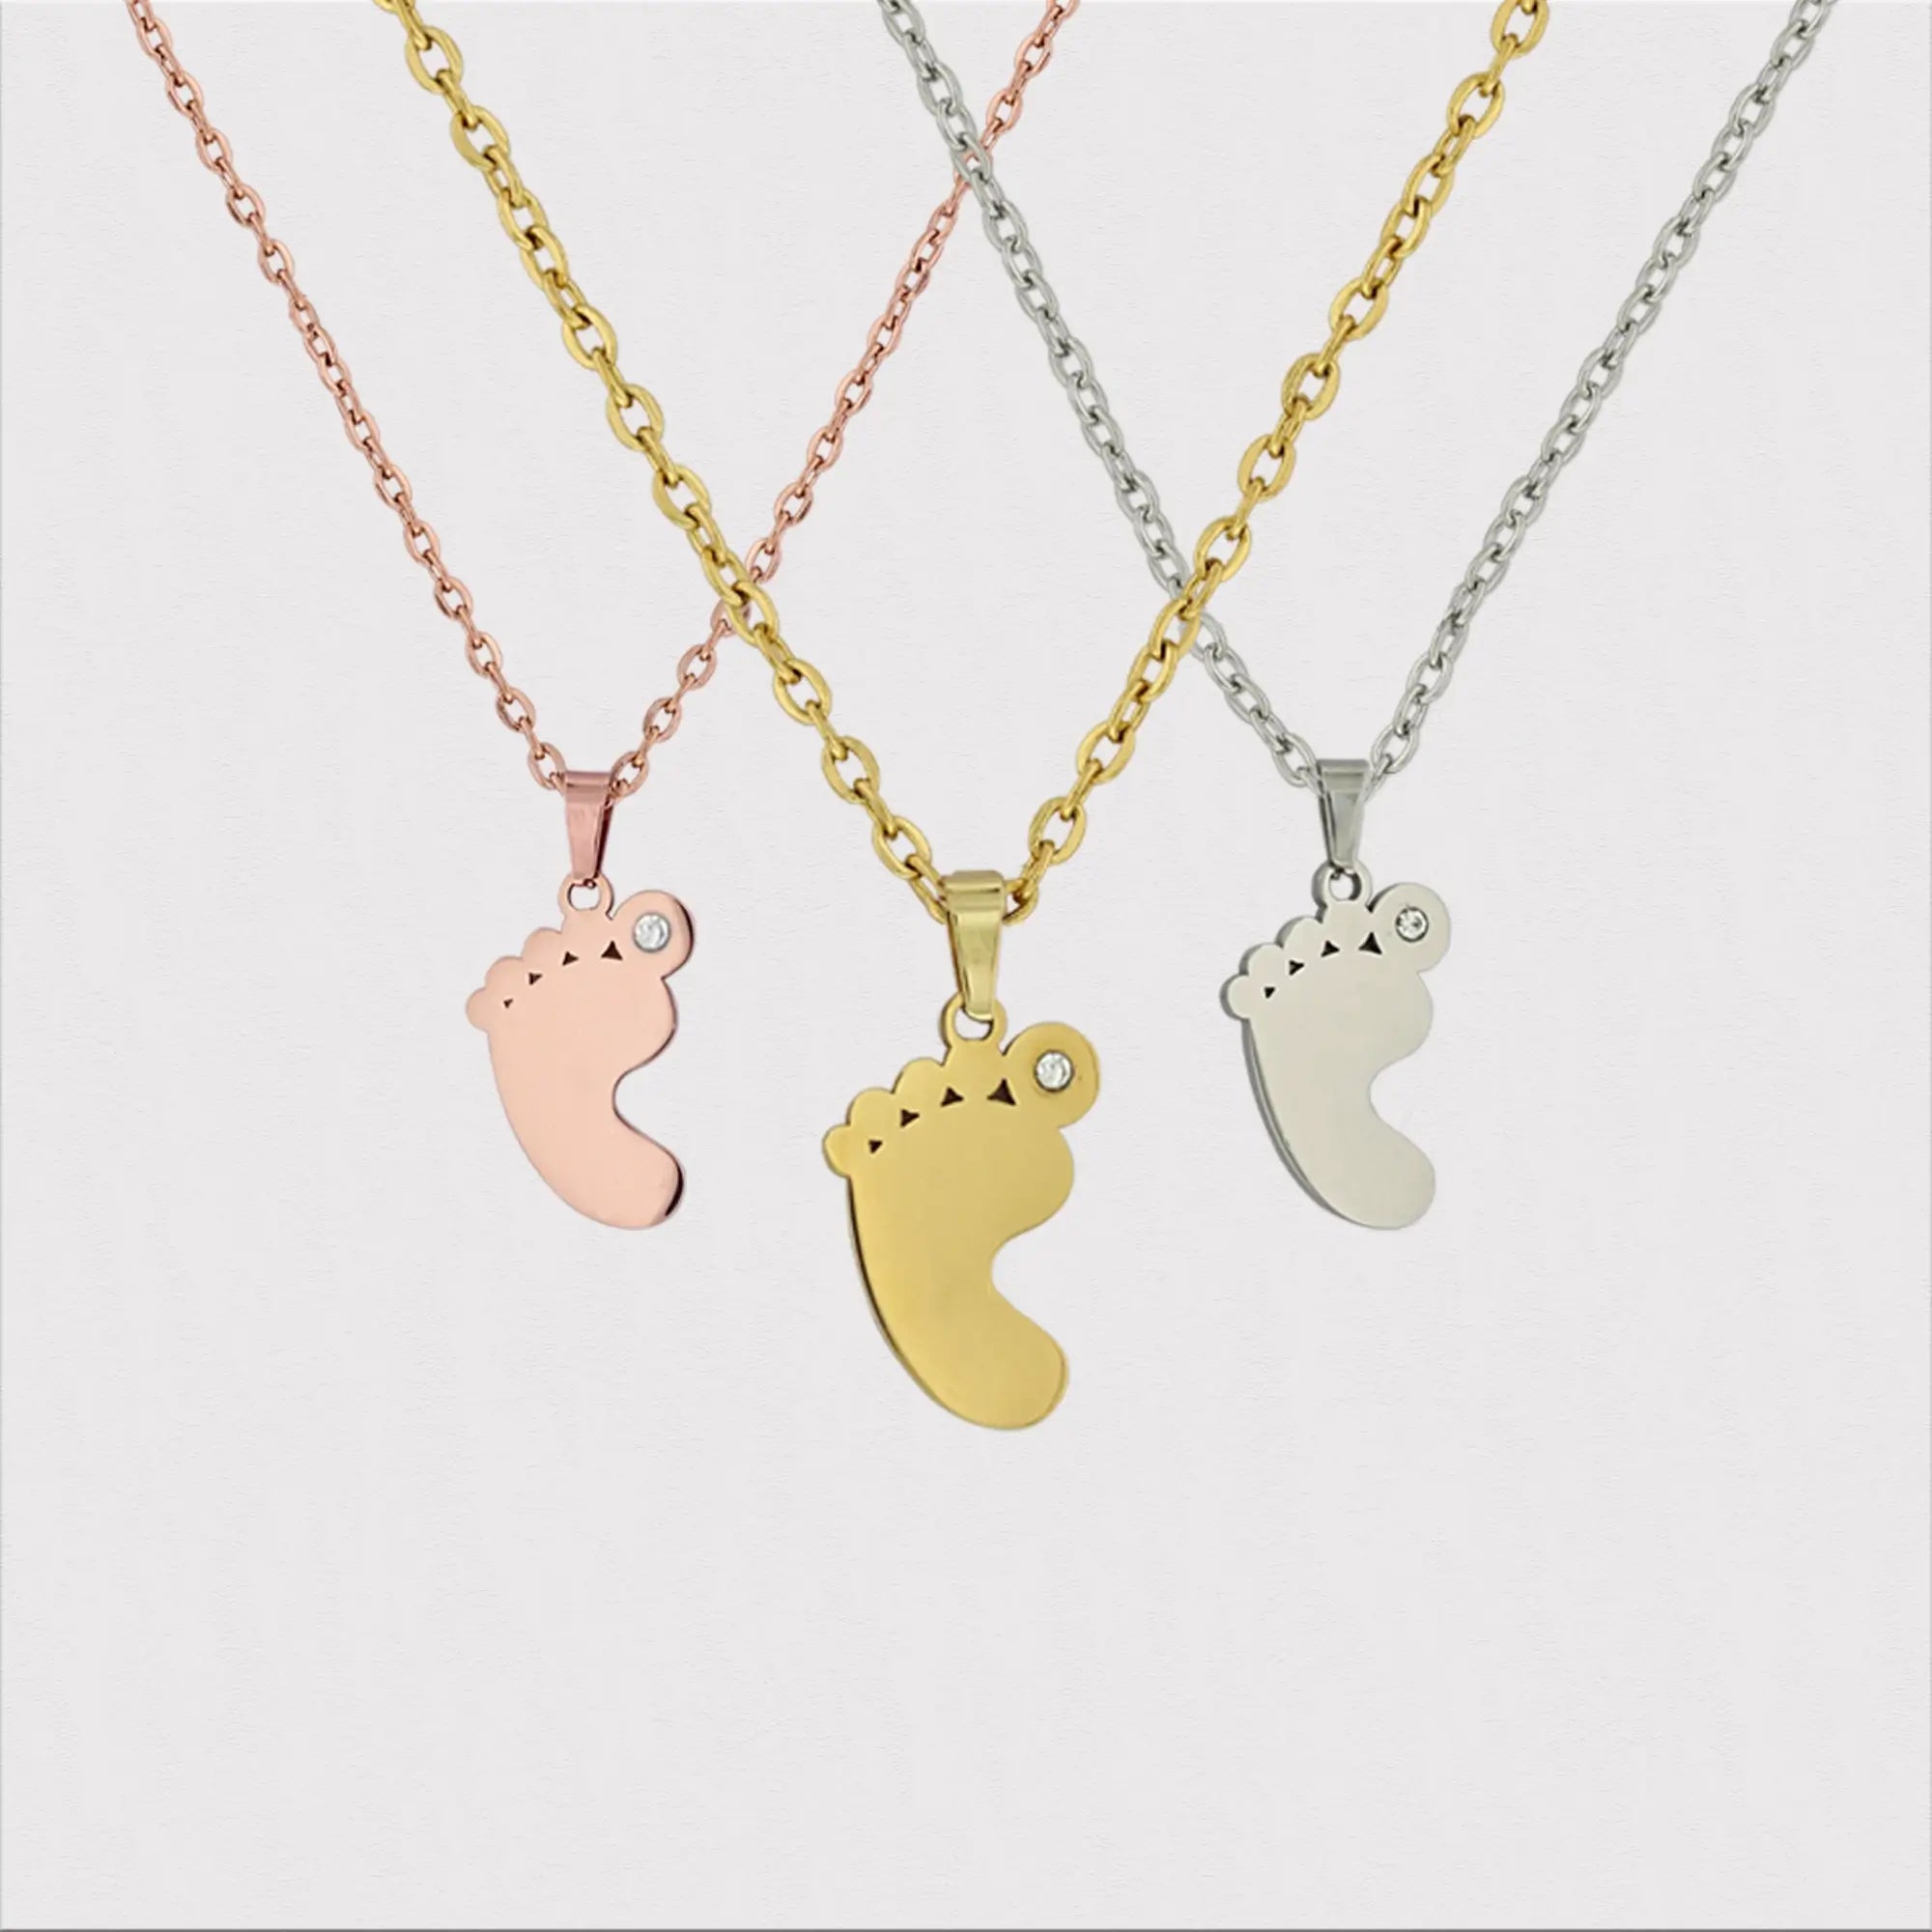 Baby birth stats, first baby necklace